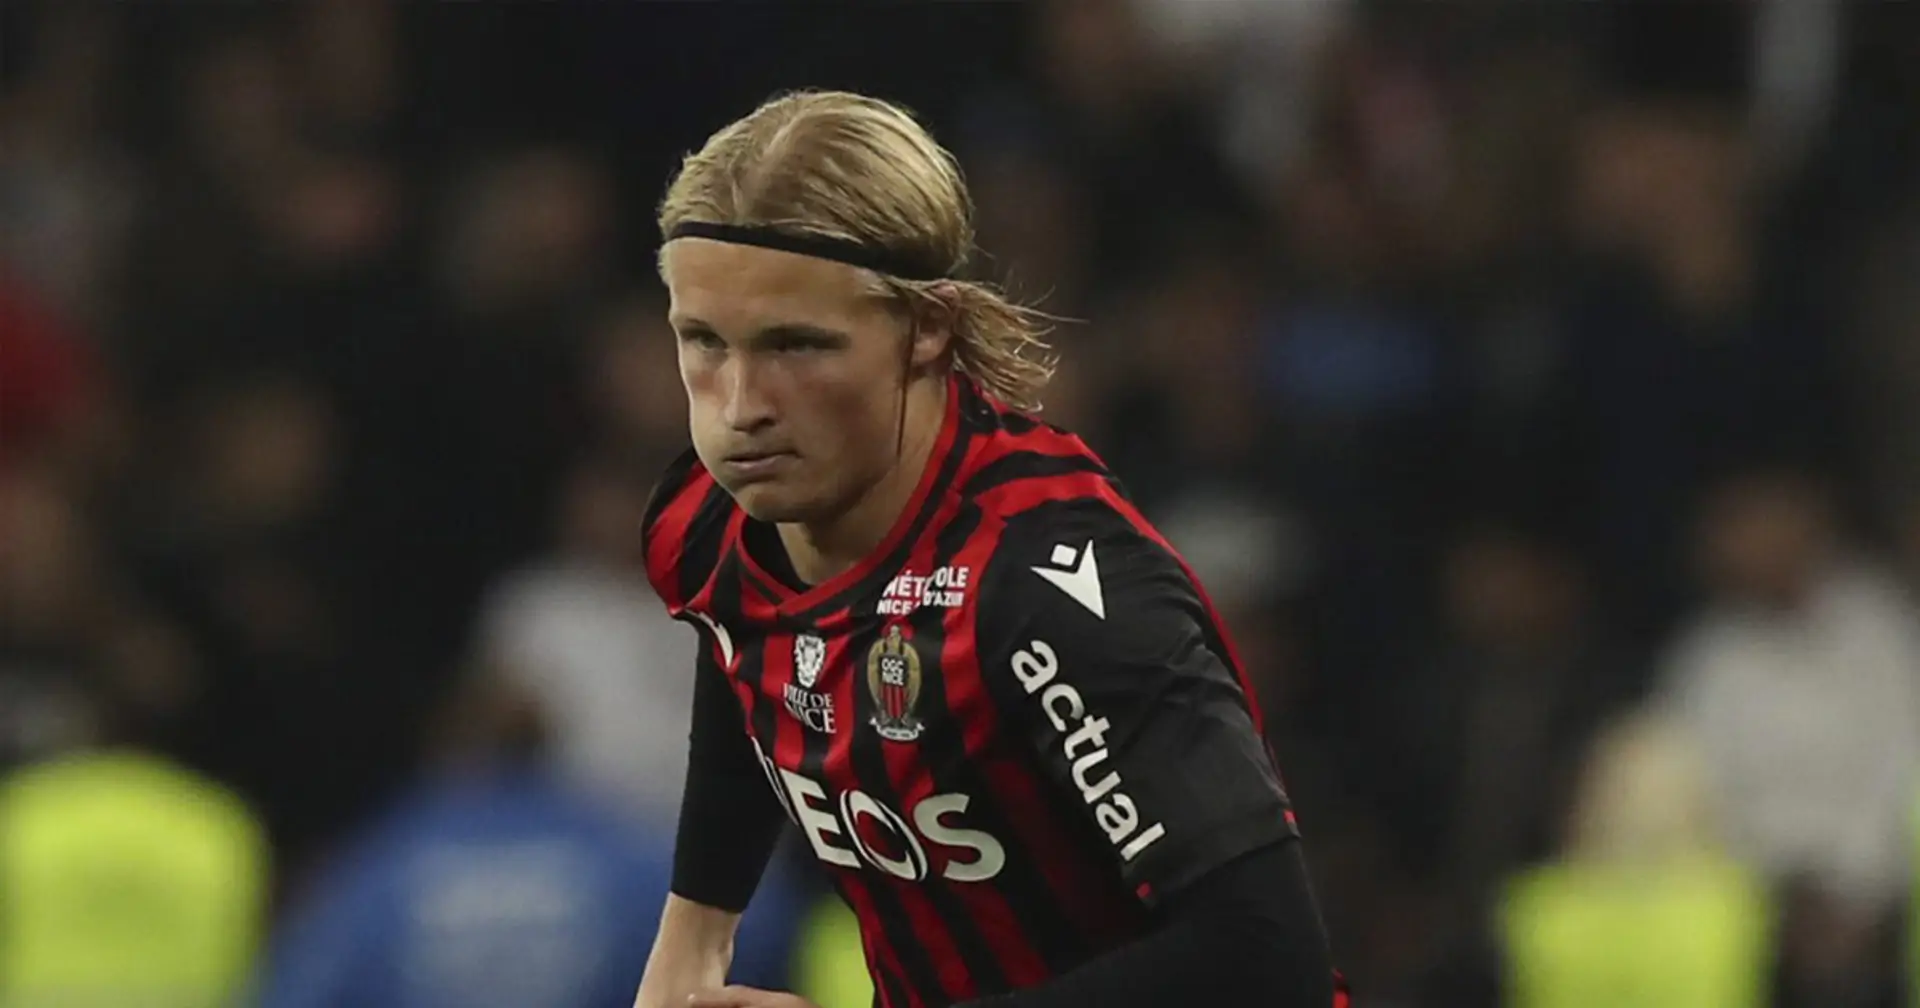 First car, then house: OGC Nice striker Dolberg robbed twice while on international duty